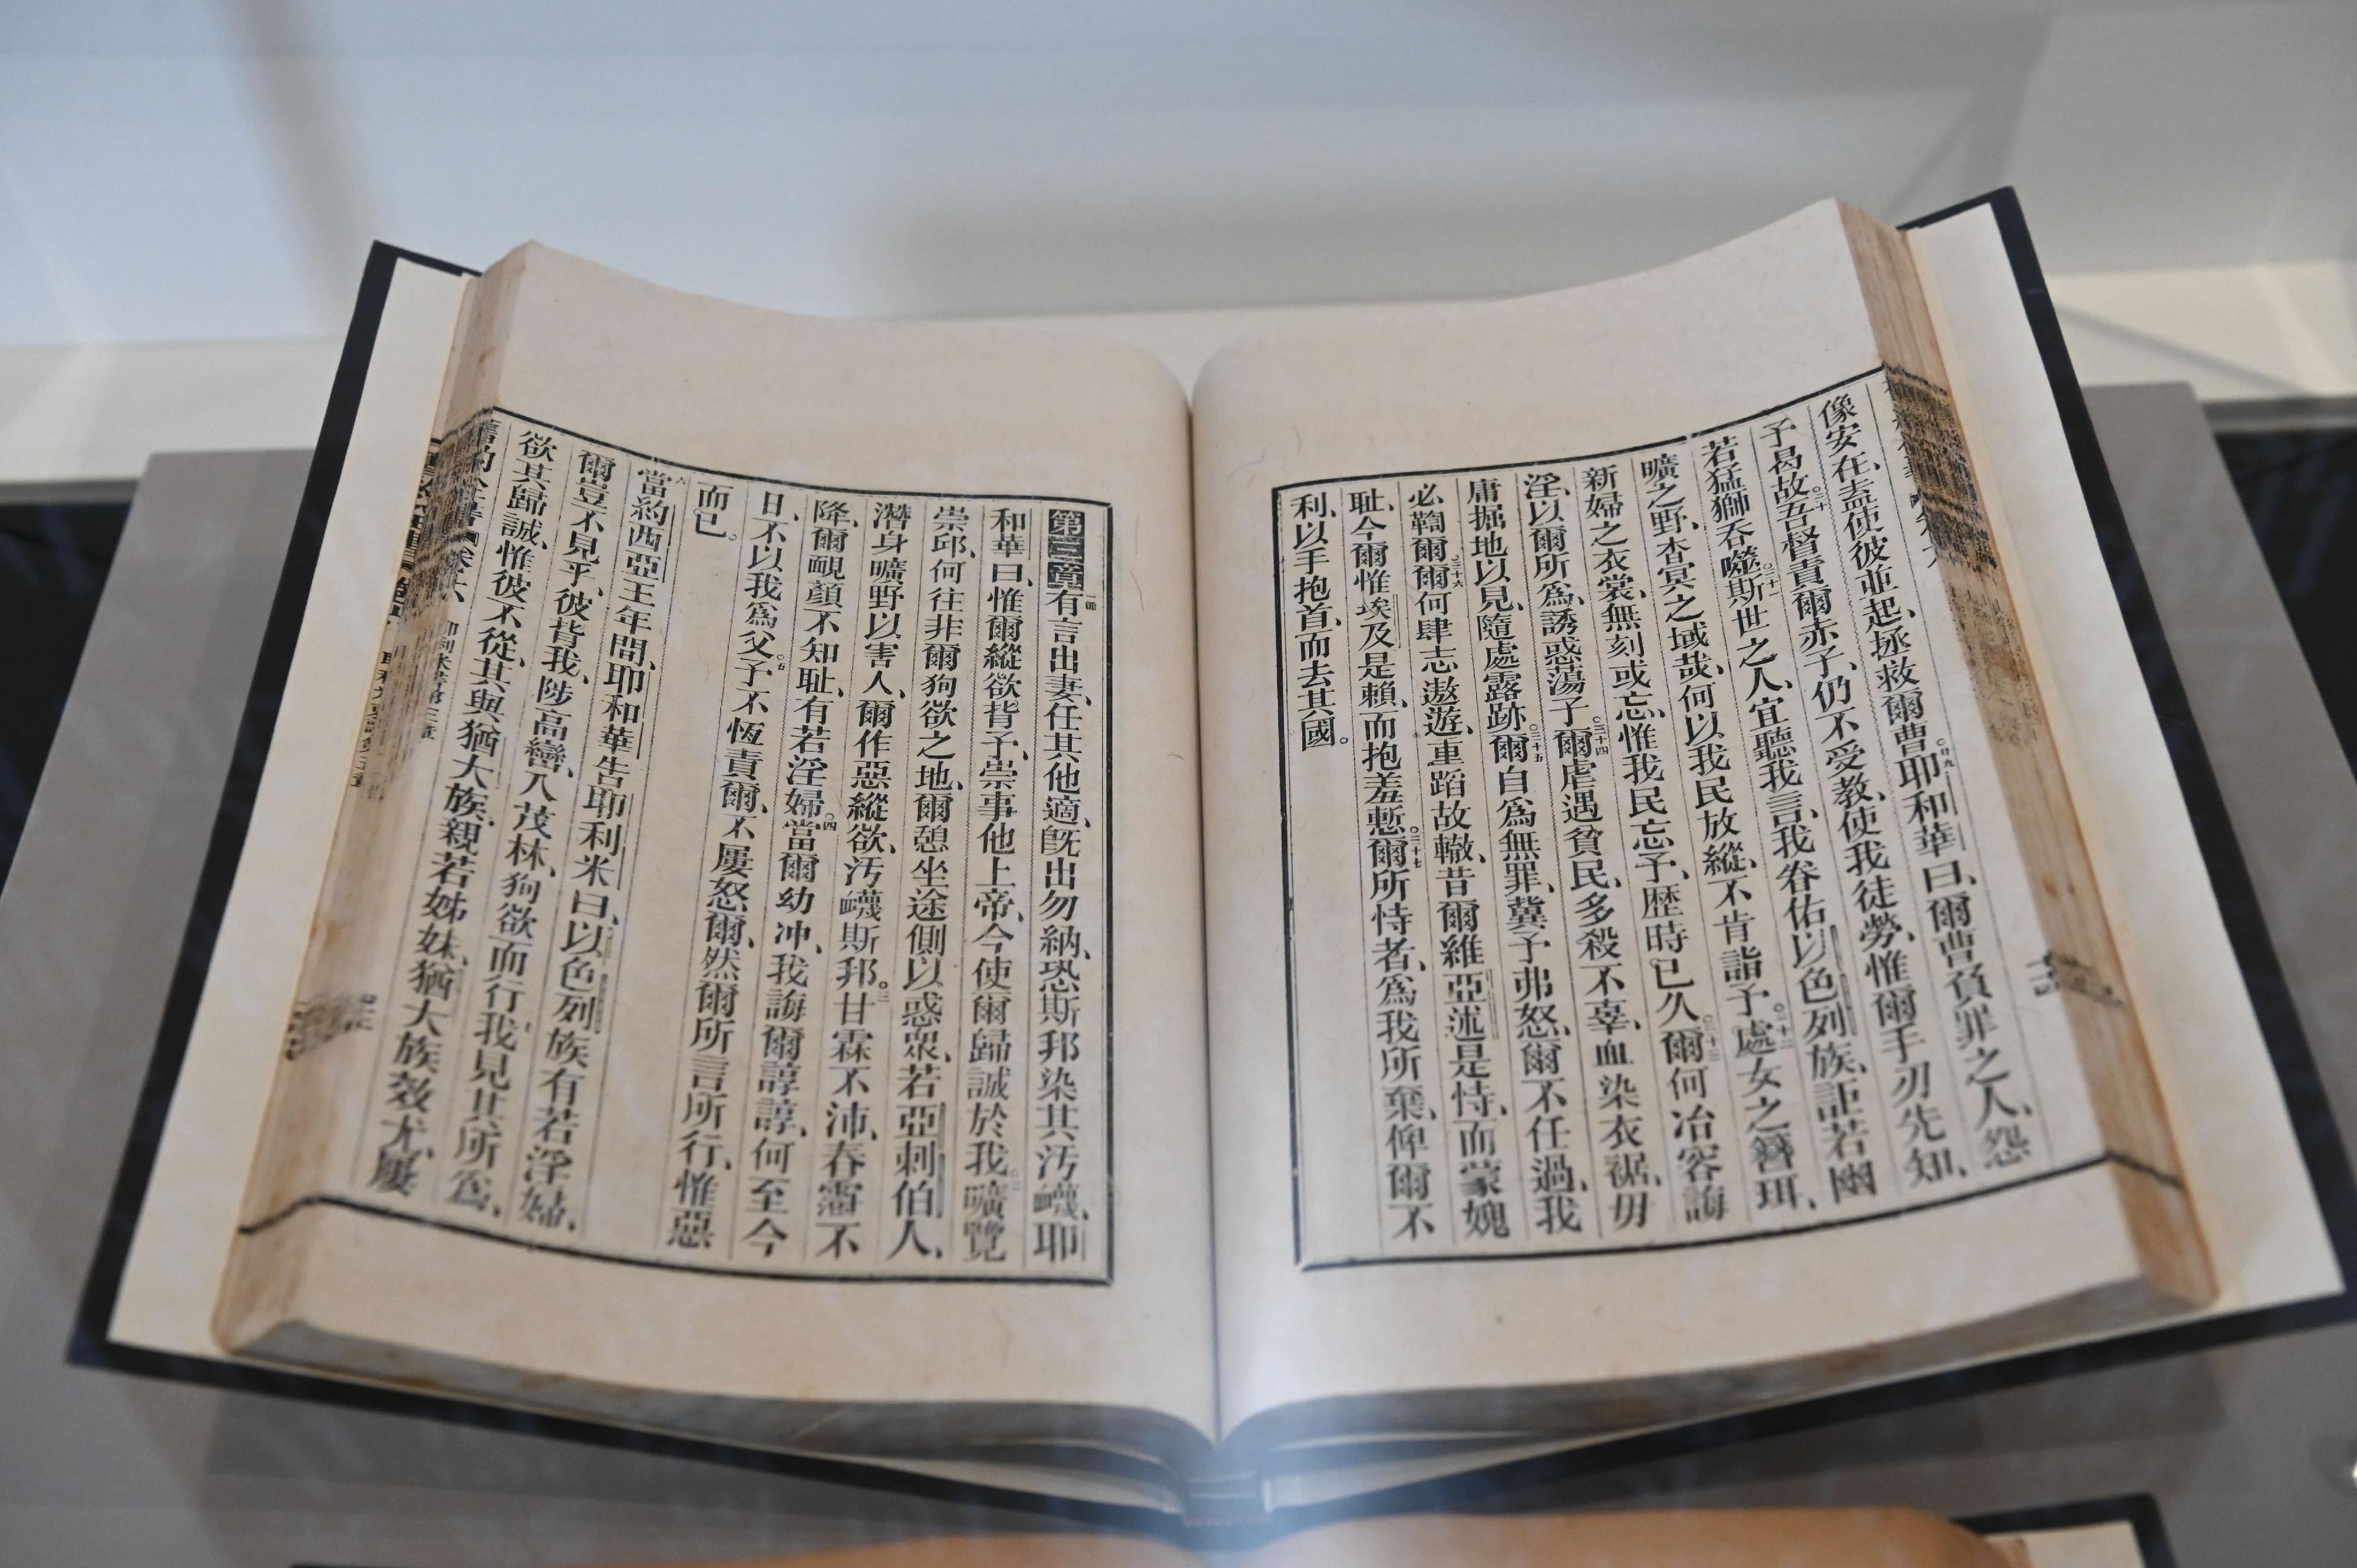 The "By the People: Creative Chinese Characters" exhibition will be staged from tomorrow (September 9) at the Hong Kong Museum of Art. Picture shows the Old Testament, from the collection of Ying Wa College. This precious exhibit was printed in 1865 (the fourth year of Tongzhi in the Qing dynasty). It was one of the publications printed with Hong Kong Type, which is considered to be the most comprehensive set of Chinese movable type from the 19th century.
